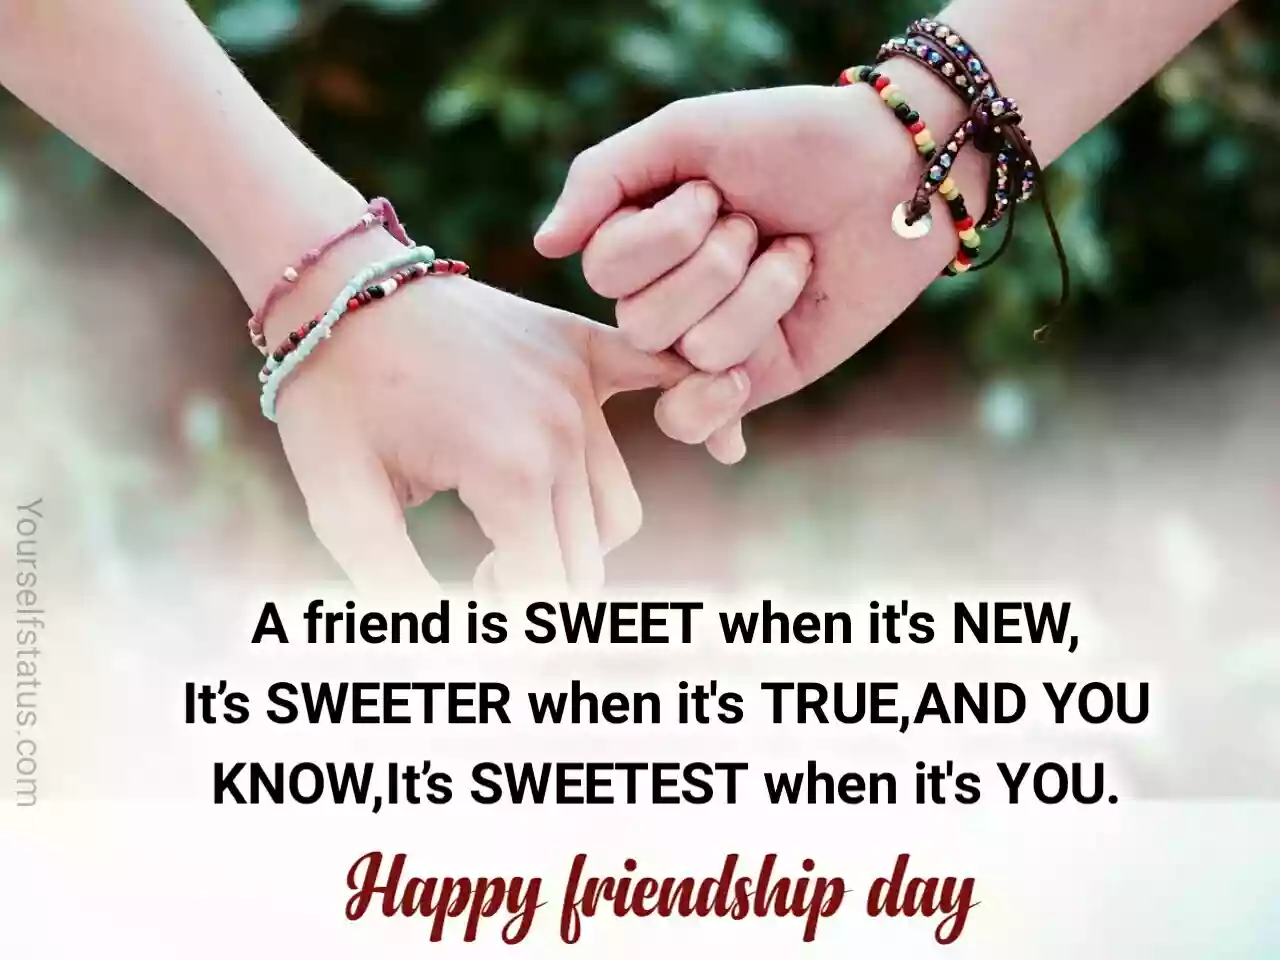 Friendship day quotes in english